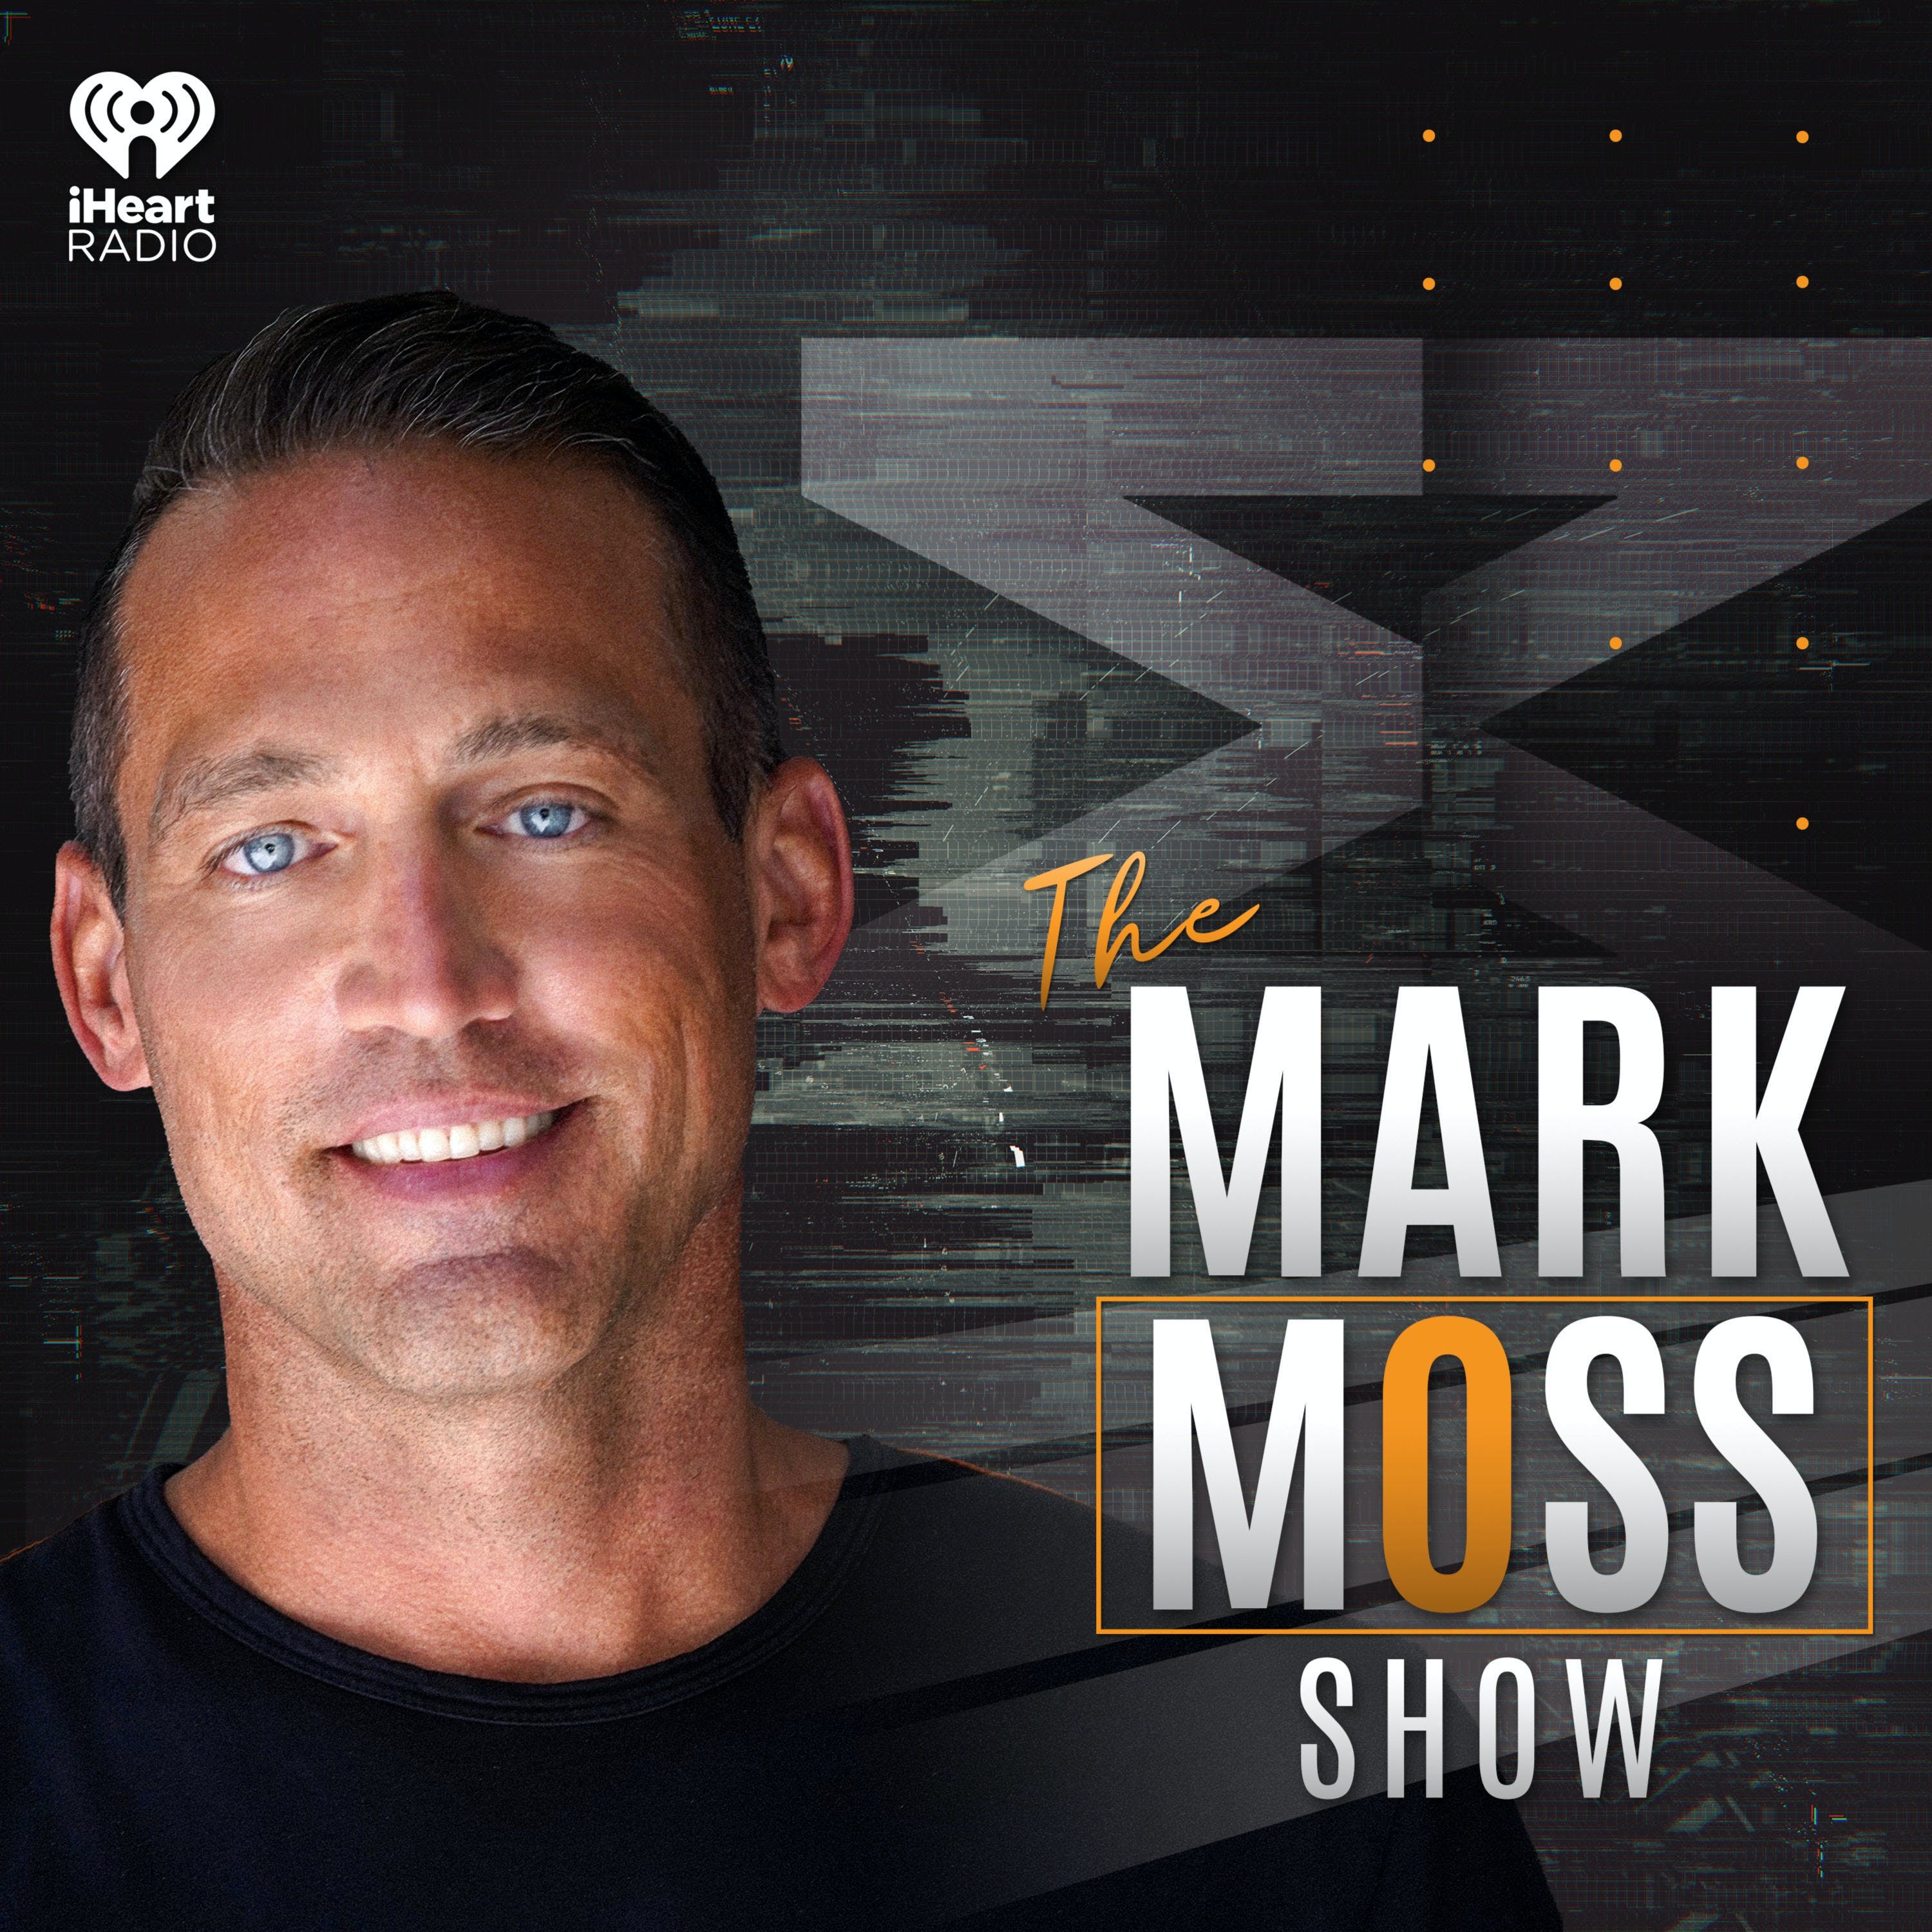 The Mark Moss Show - eCash and the Fight with the Fed